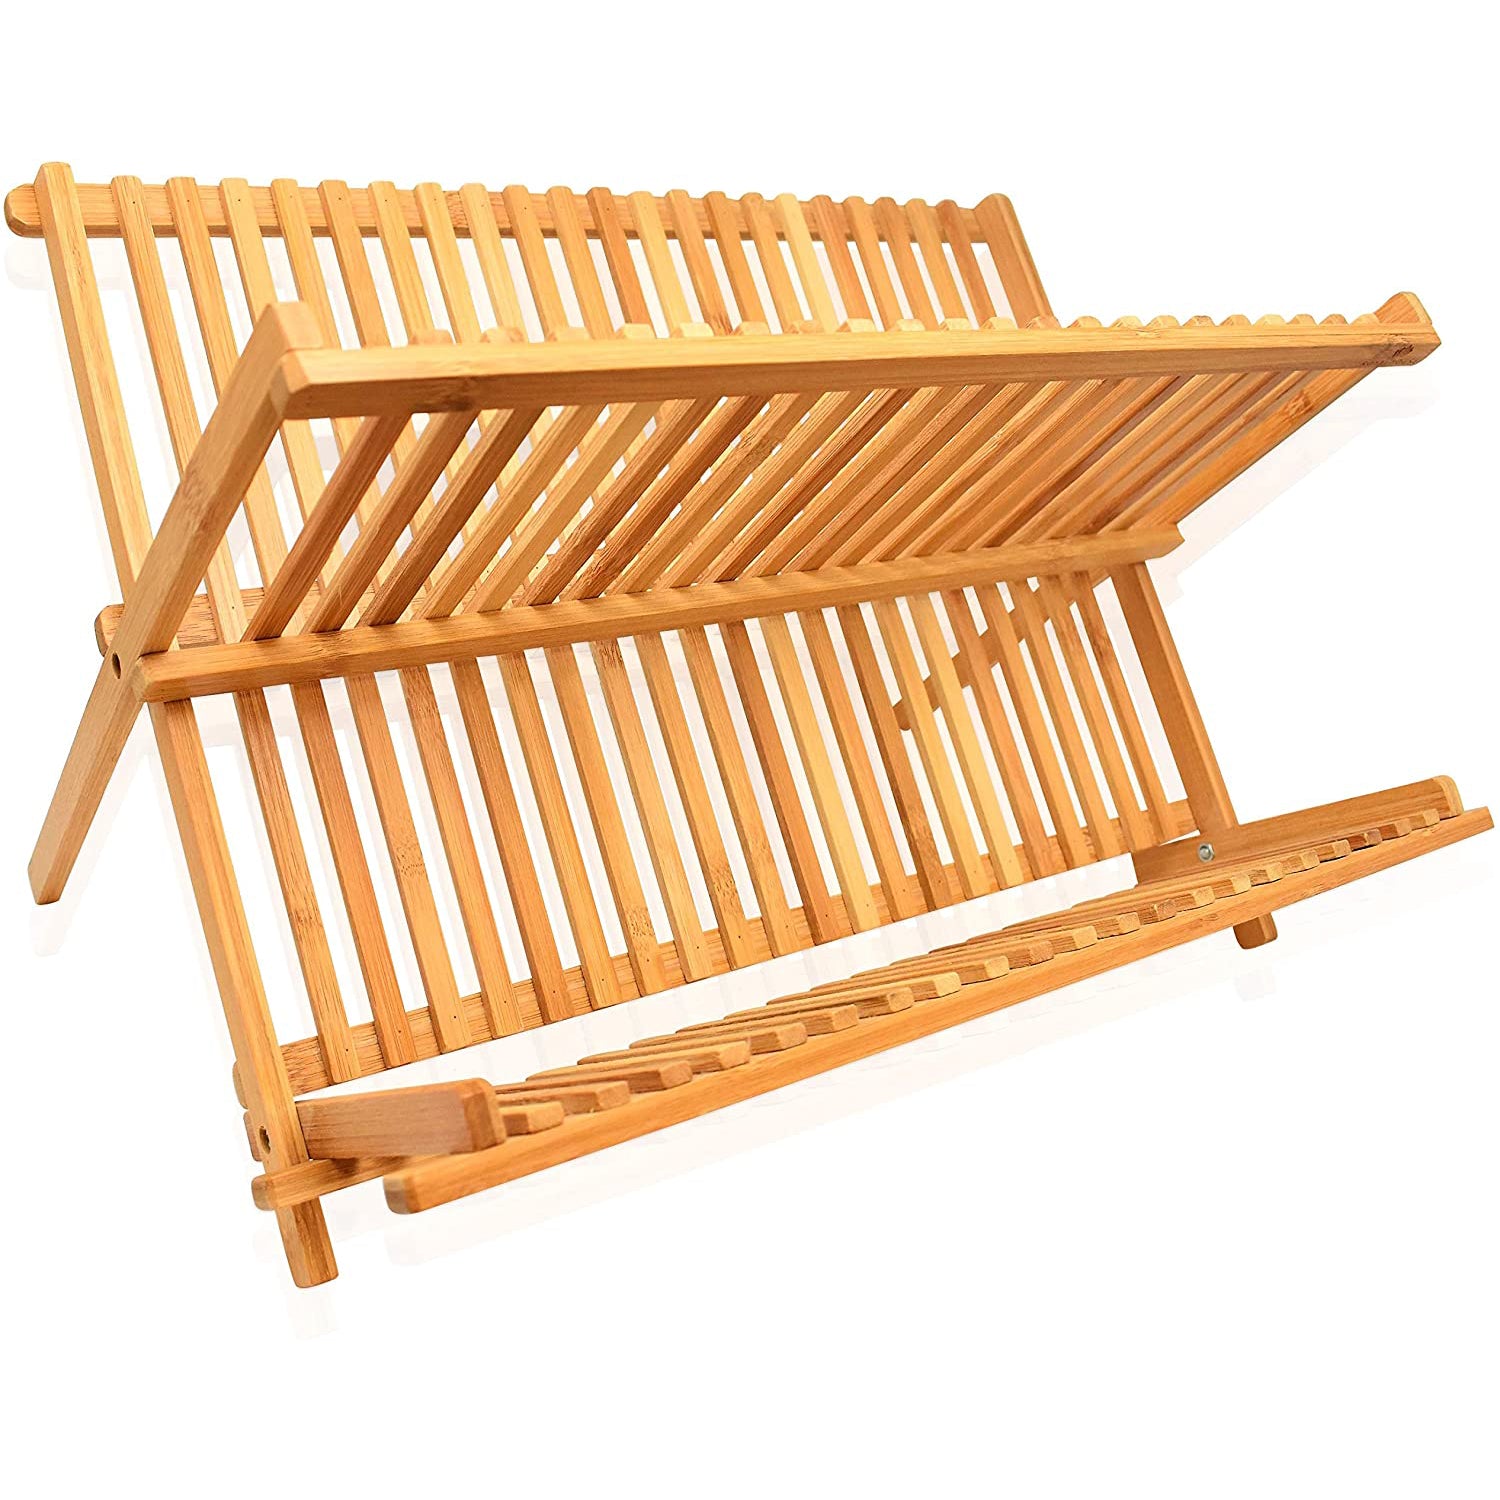 Bamboo 2 Tier Dish Drying Rack - Collapsible Dish Drainer Rack and Best Dish Holder for Kitchen Countertop by Royal Craft Wood